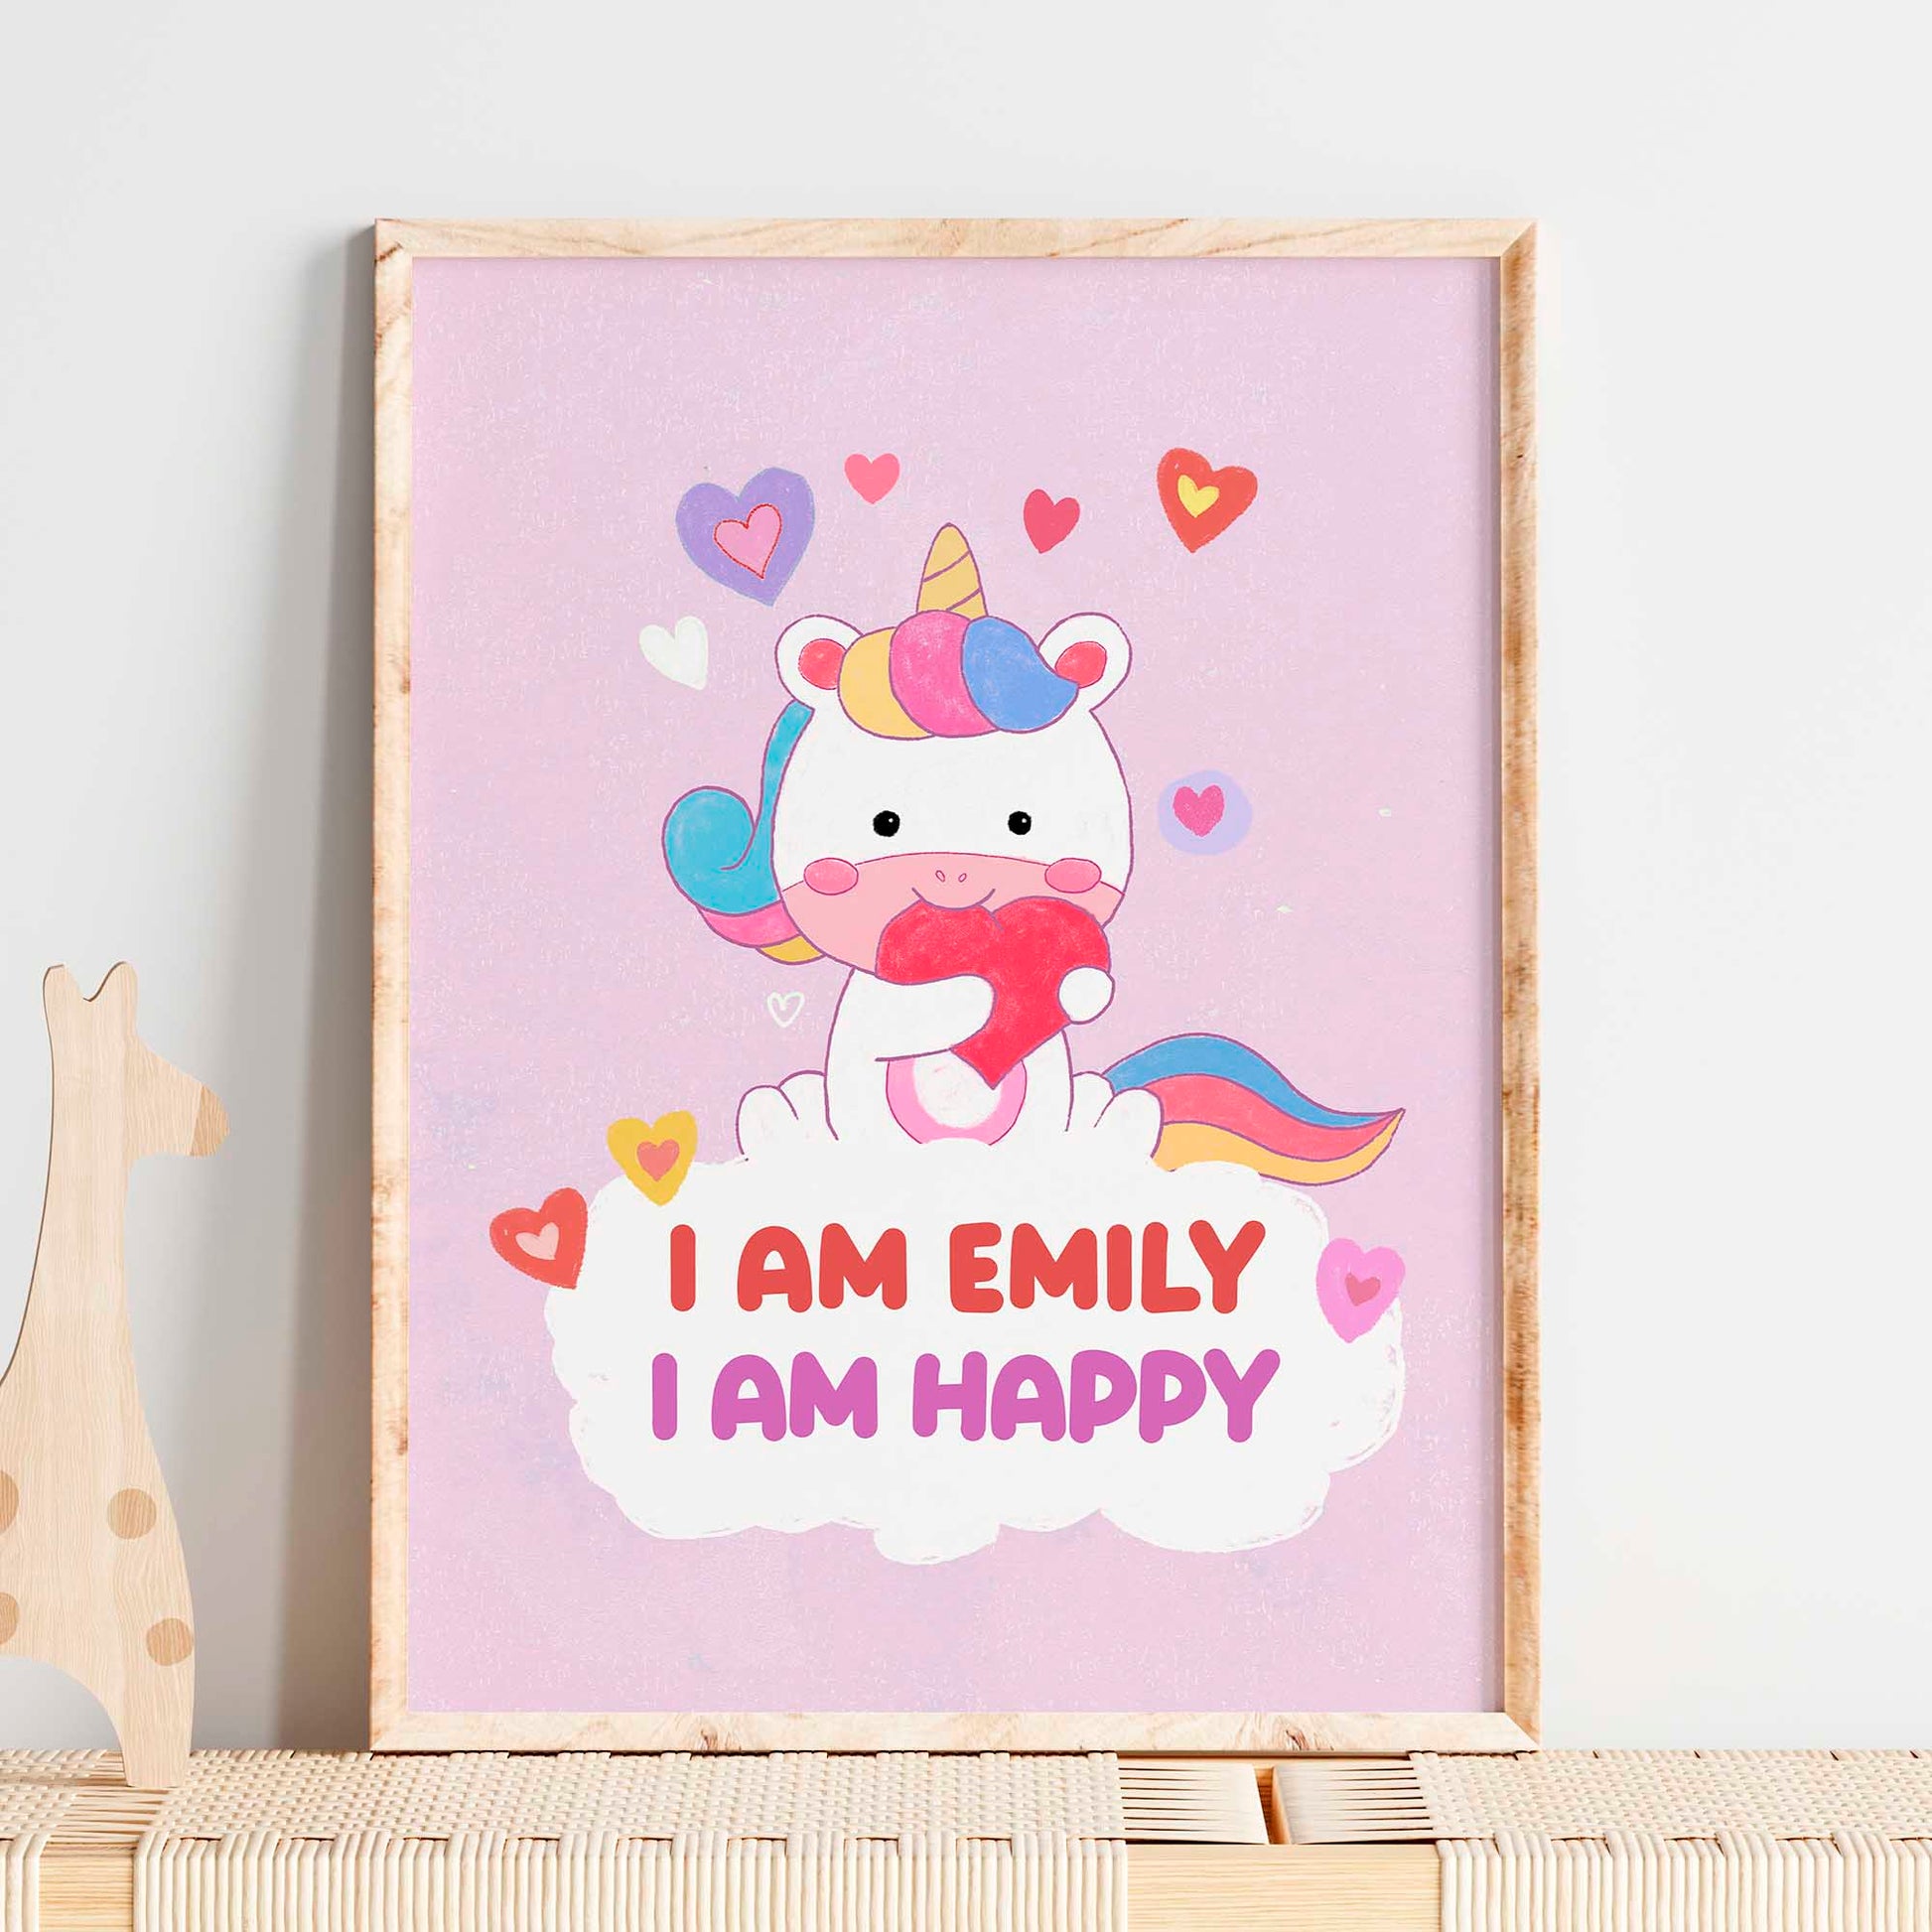 Magical unicorn in a frame with cheerful affirmations, great for baby girl room decor.